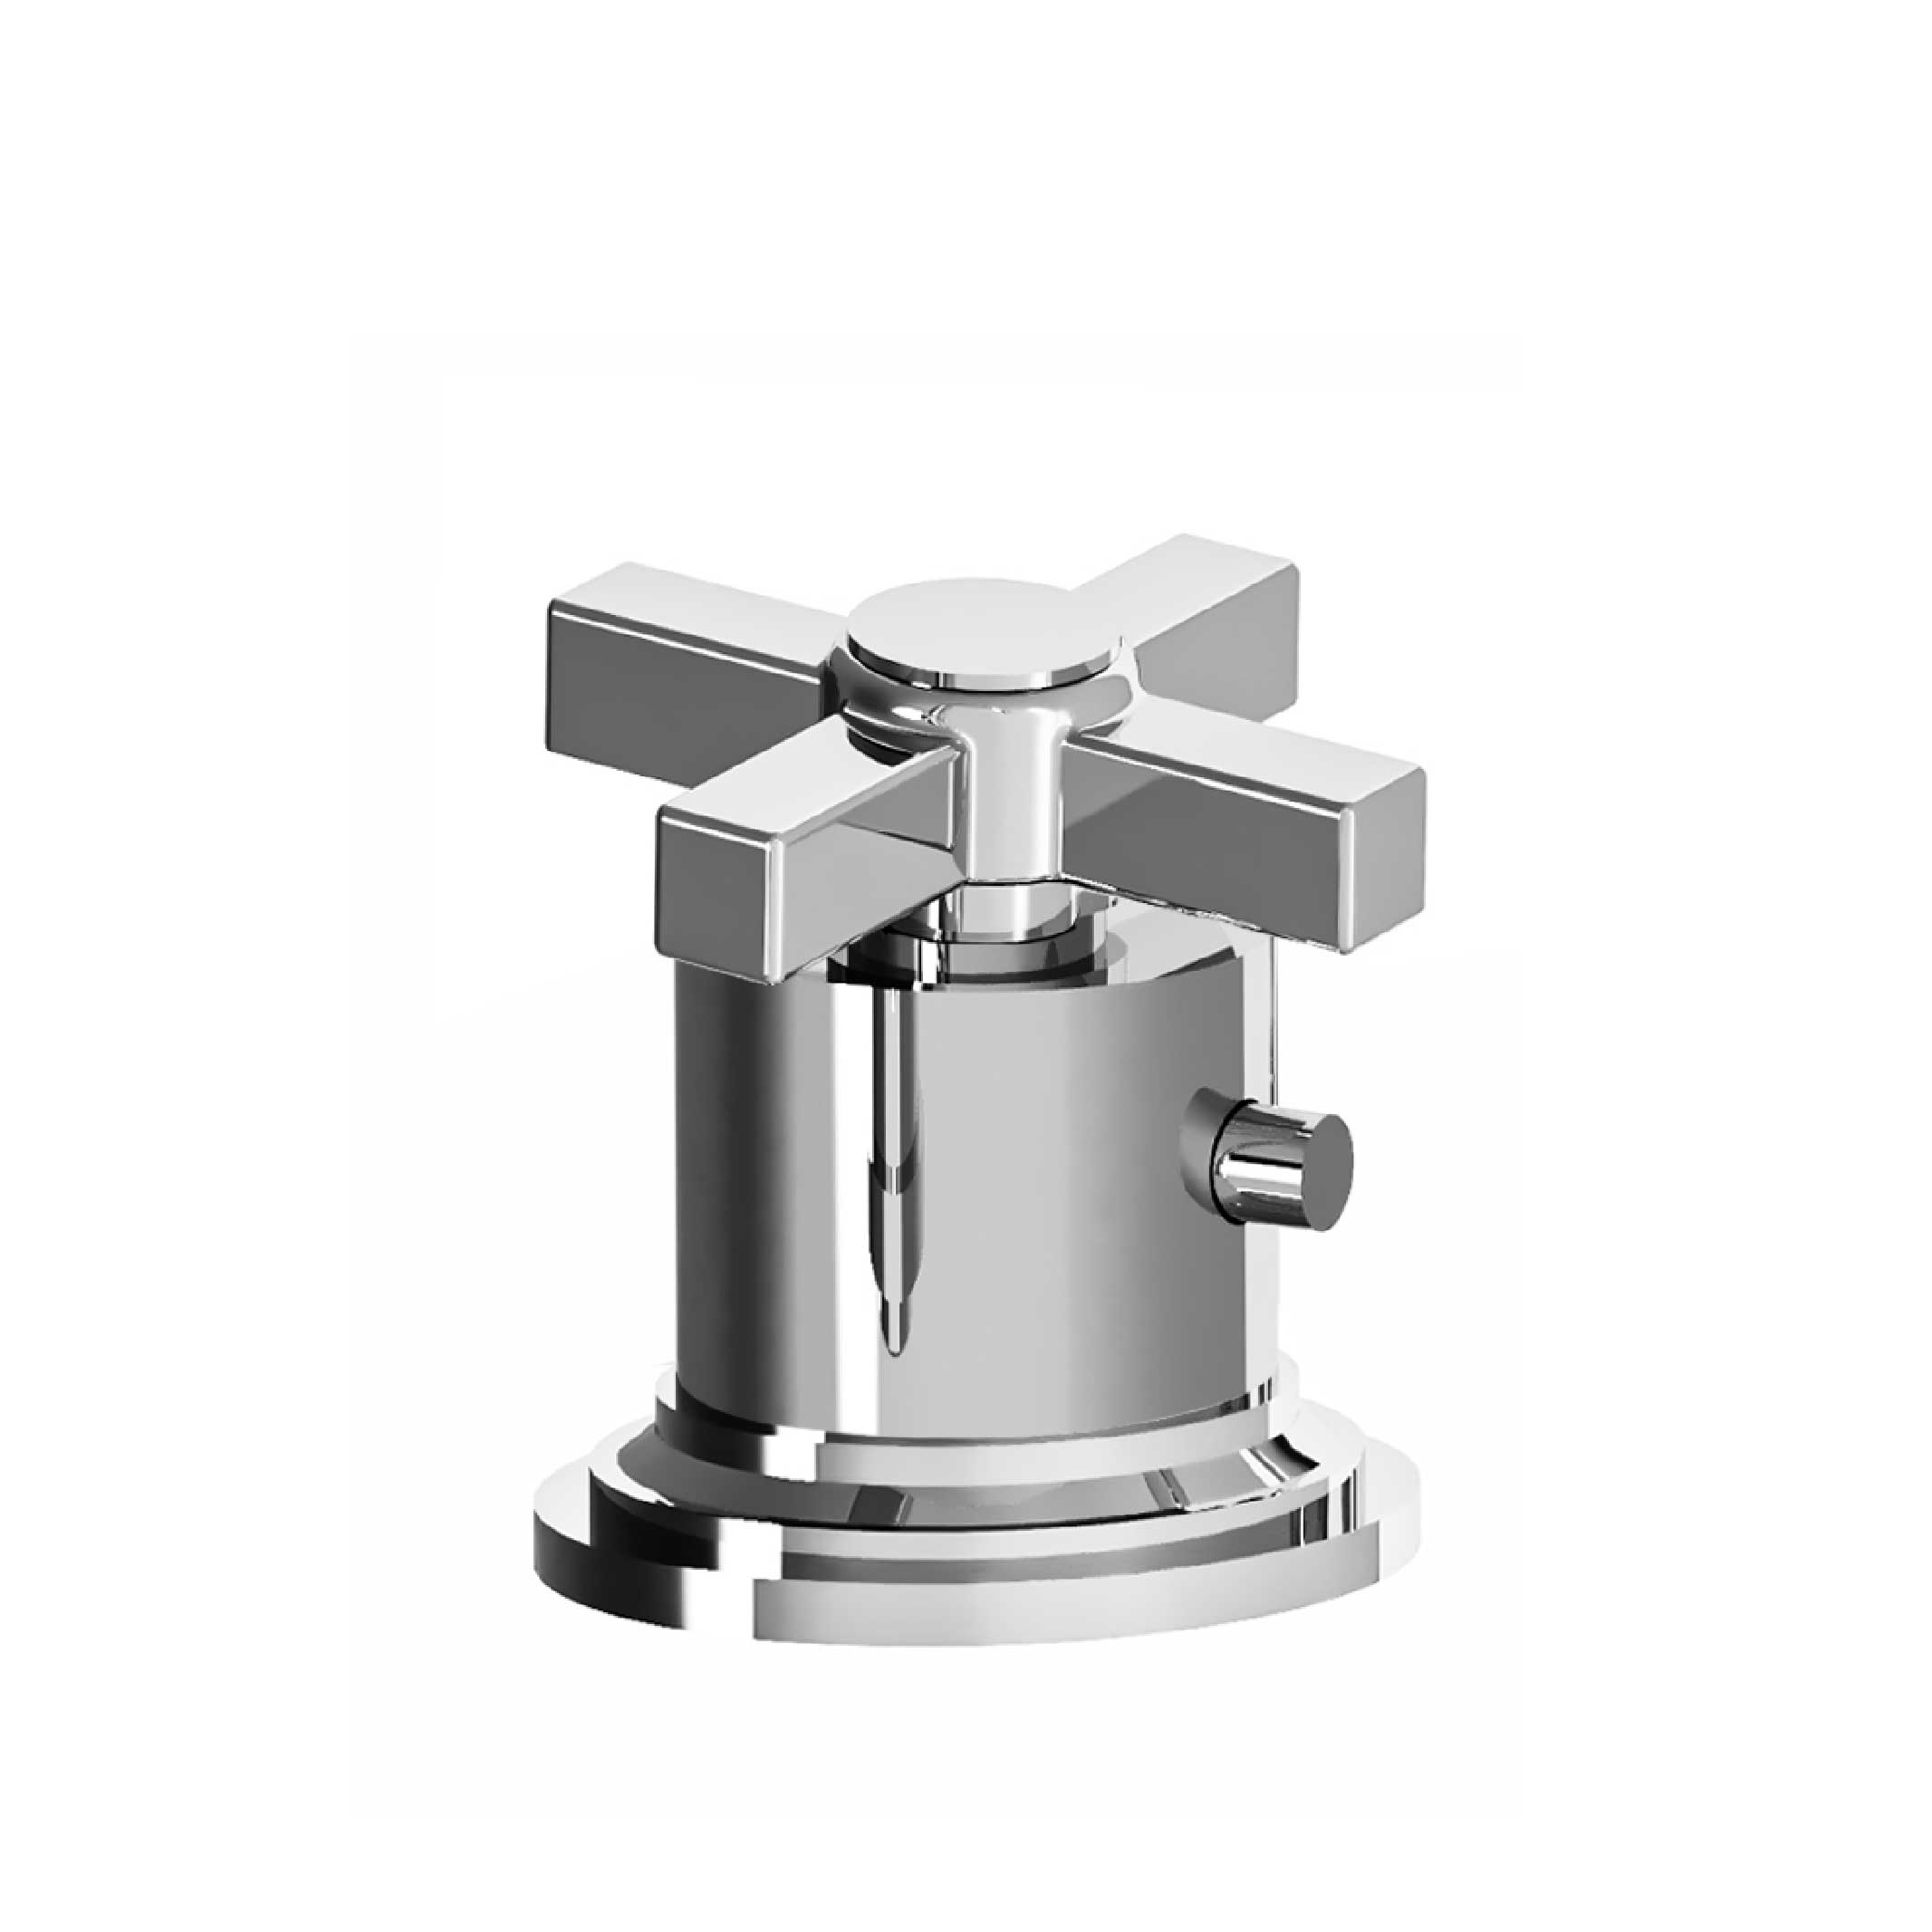 M60-330T Rim mounted thermo. mixer